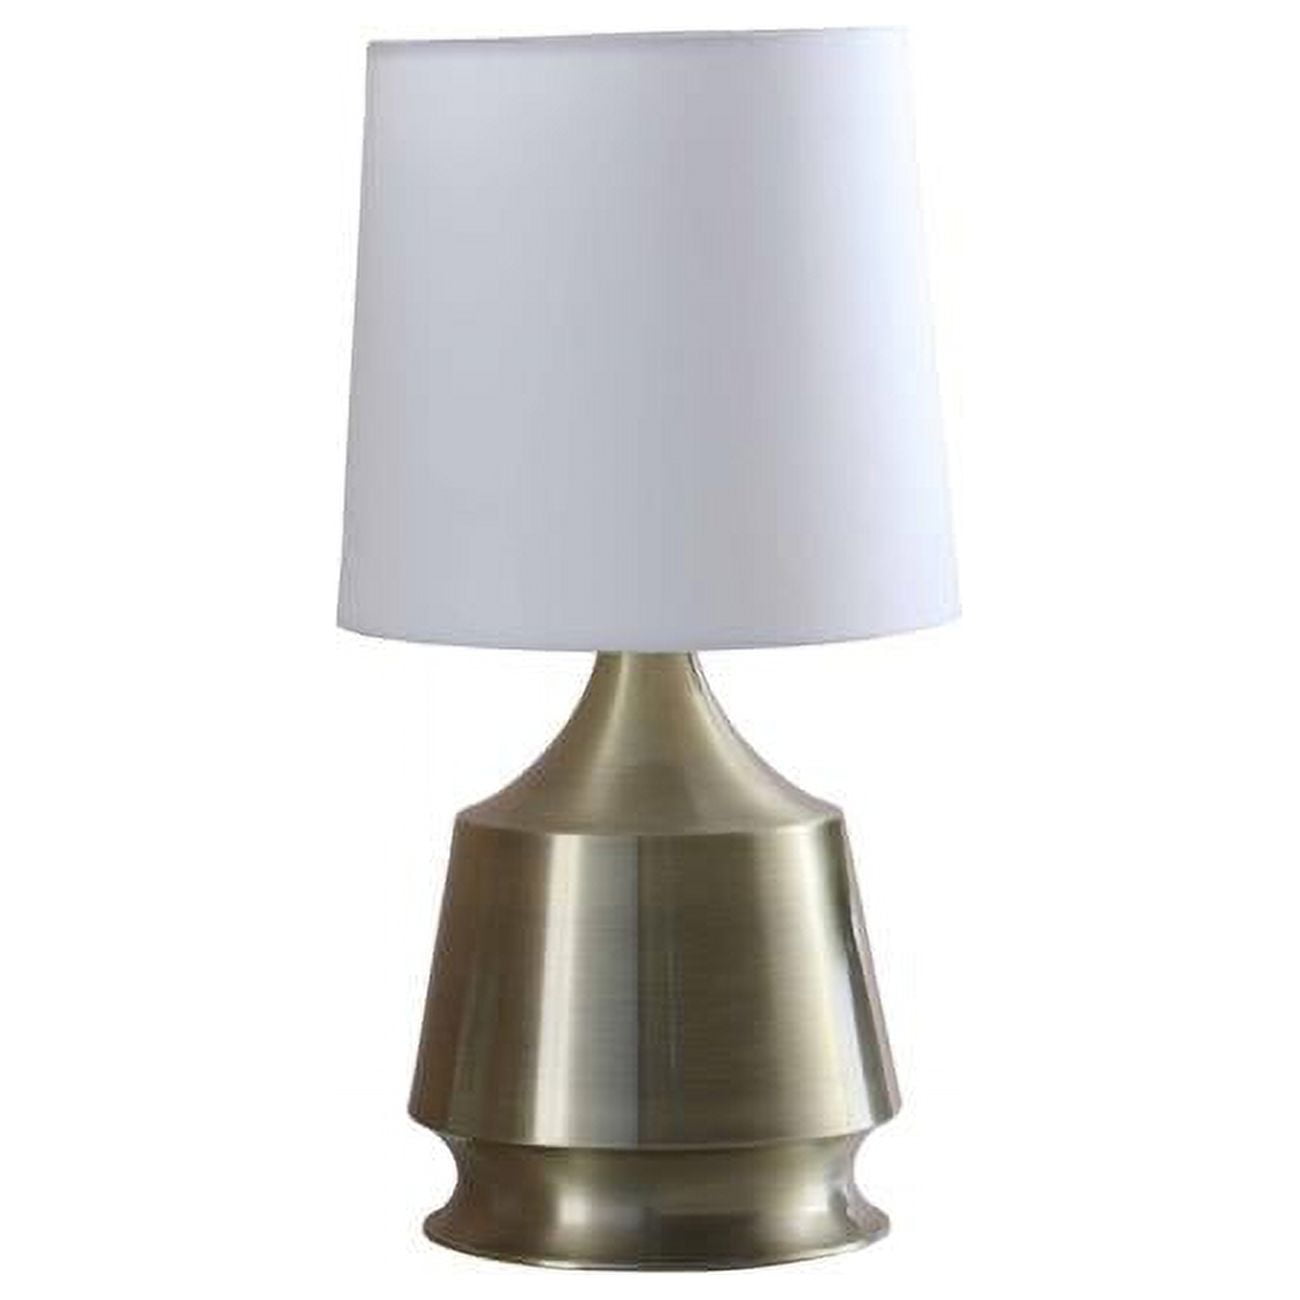 Sintechno S-8316 20 in. Artistic Coin Metal Chain Table Lamp 